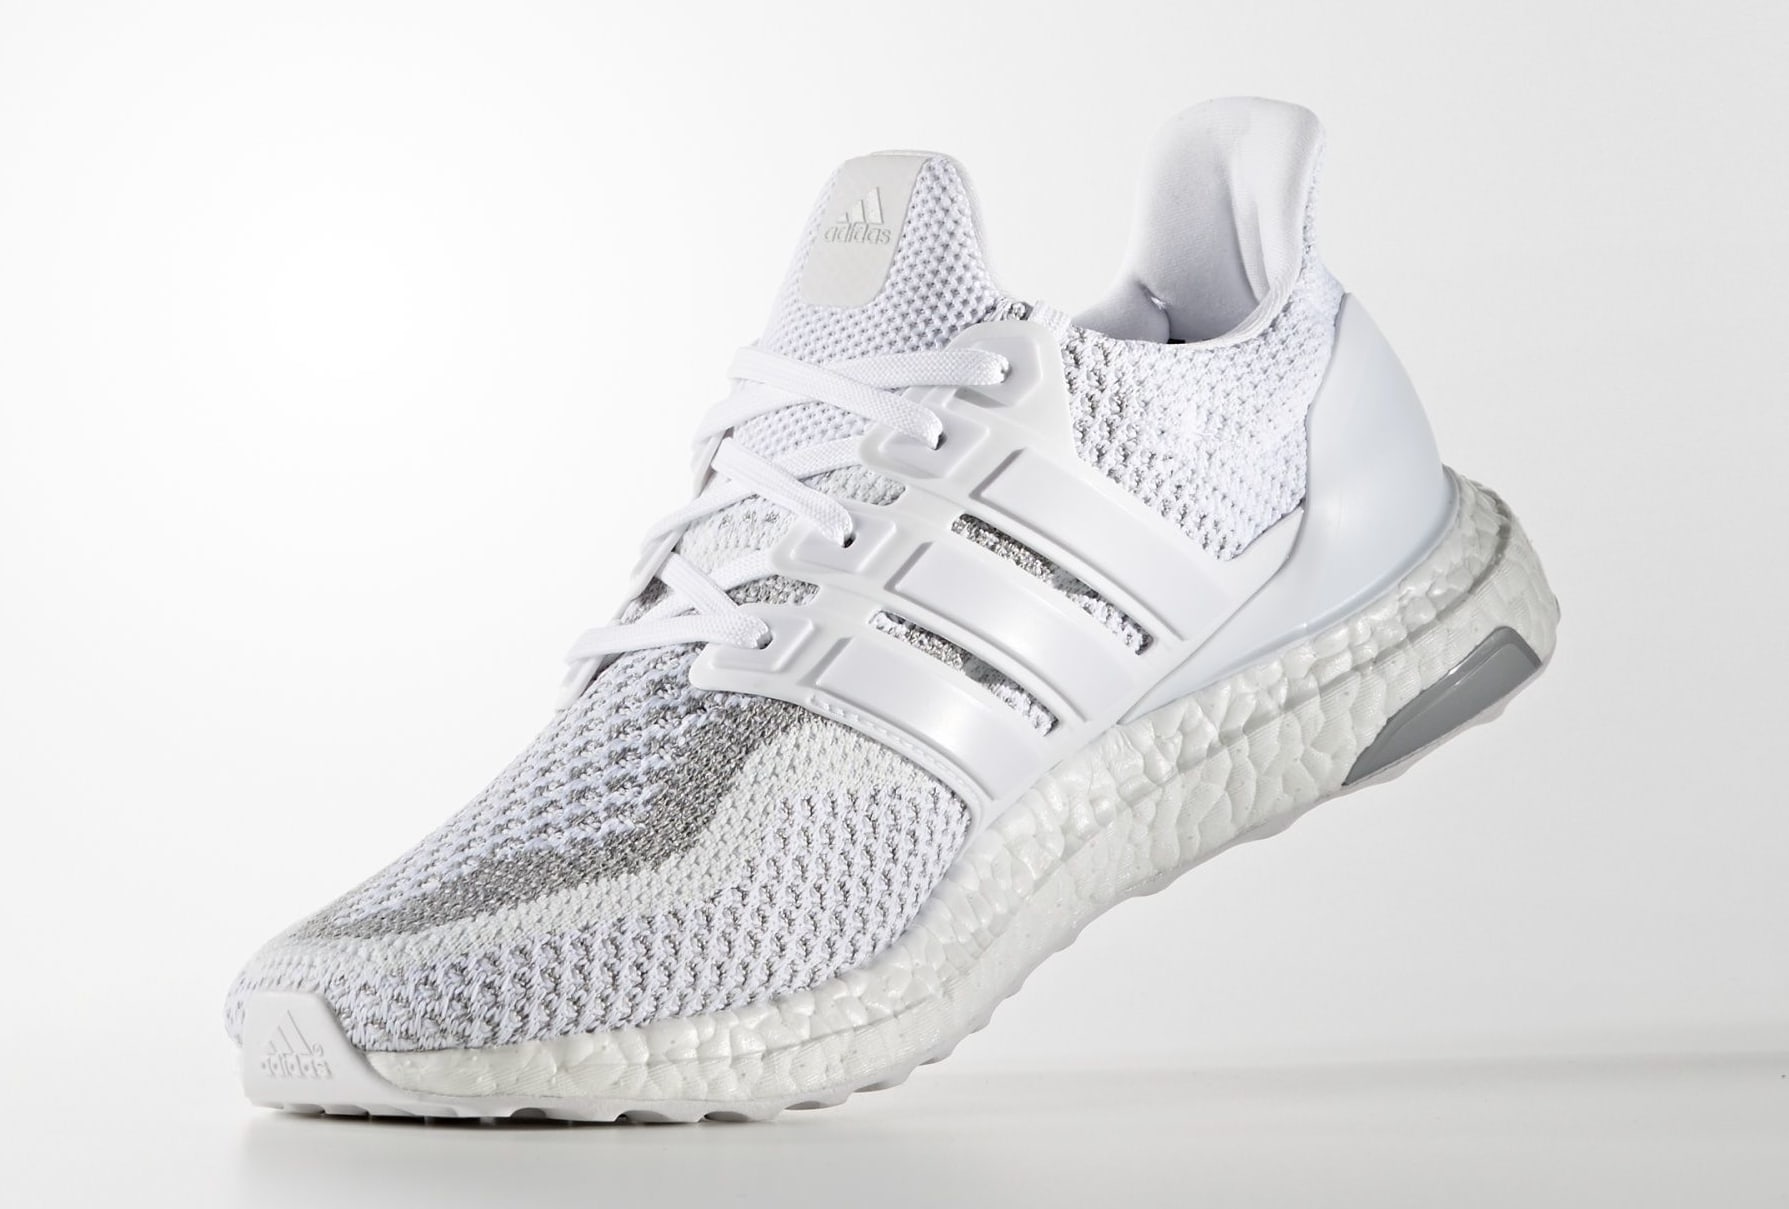 Adidas Ultra Boost 2.0 White Reflective 2018 Release Date BB3928 Medial